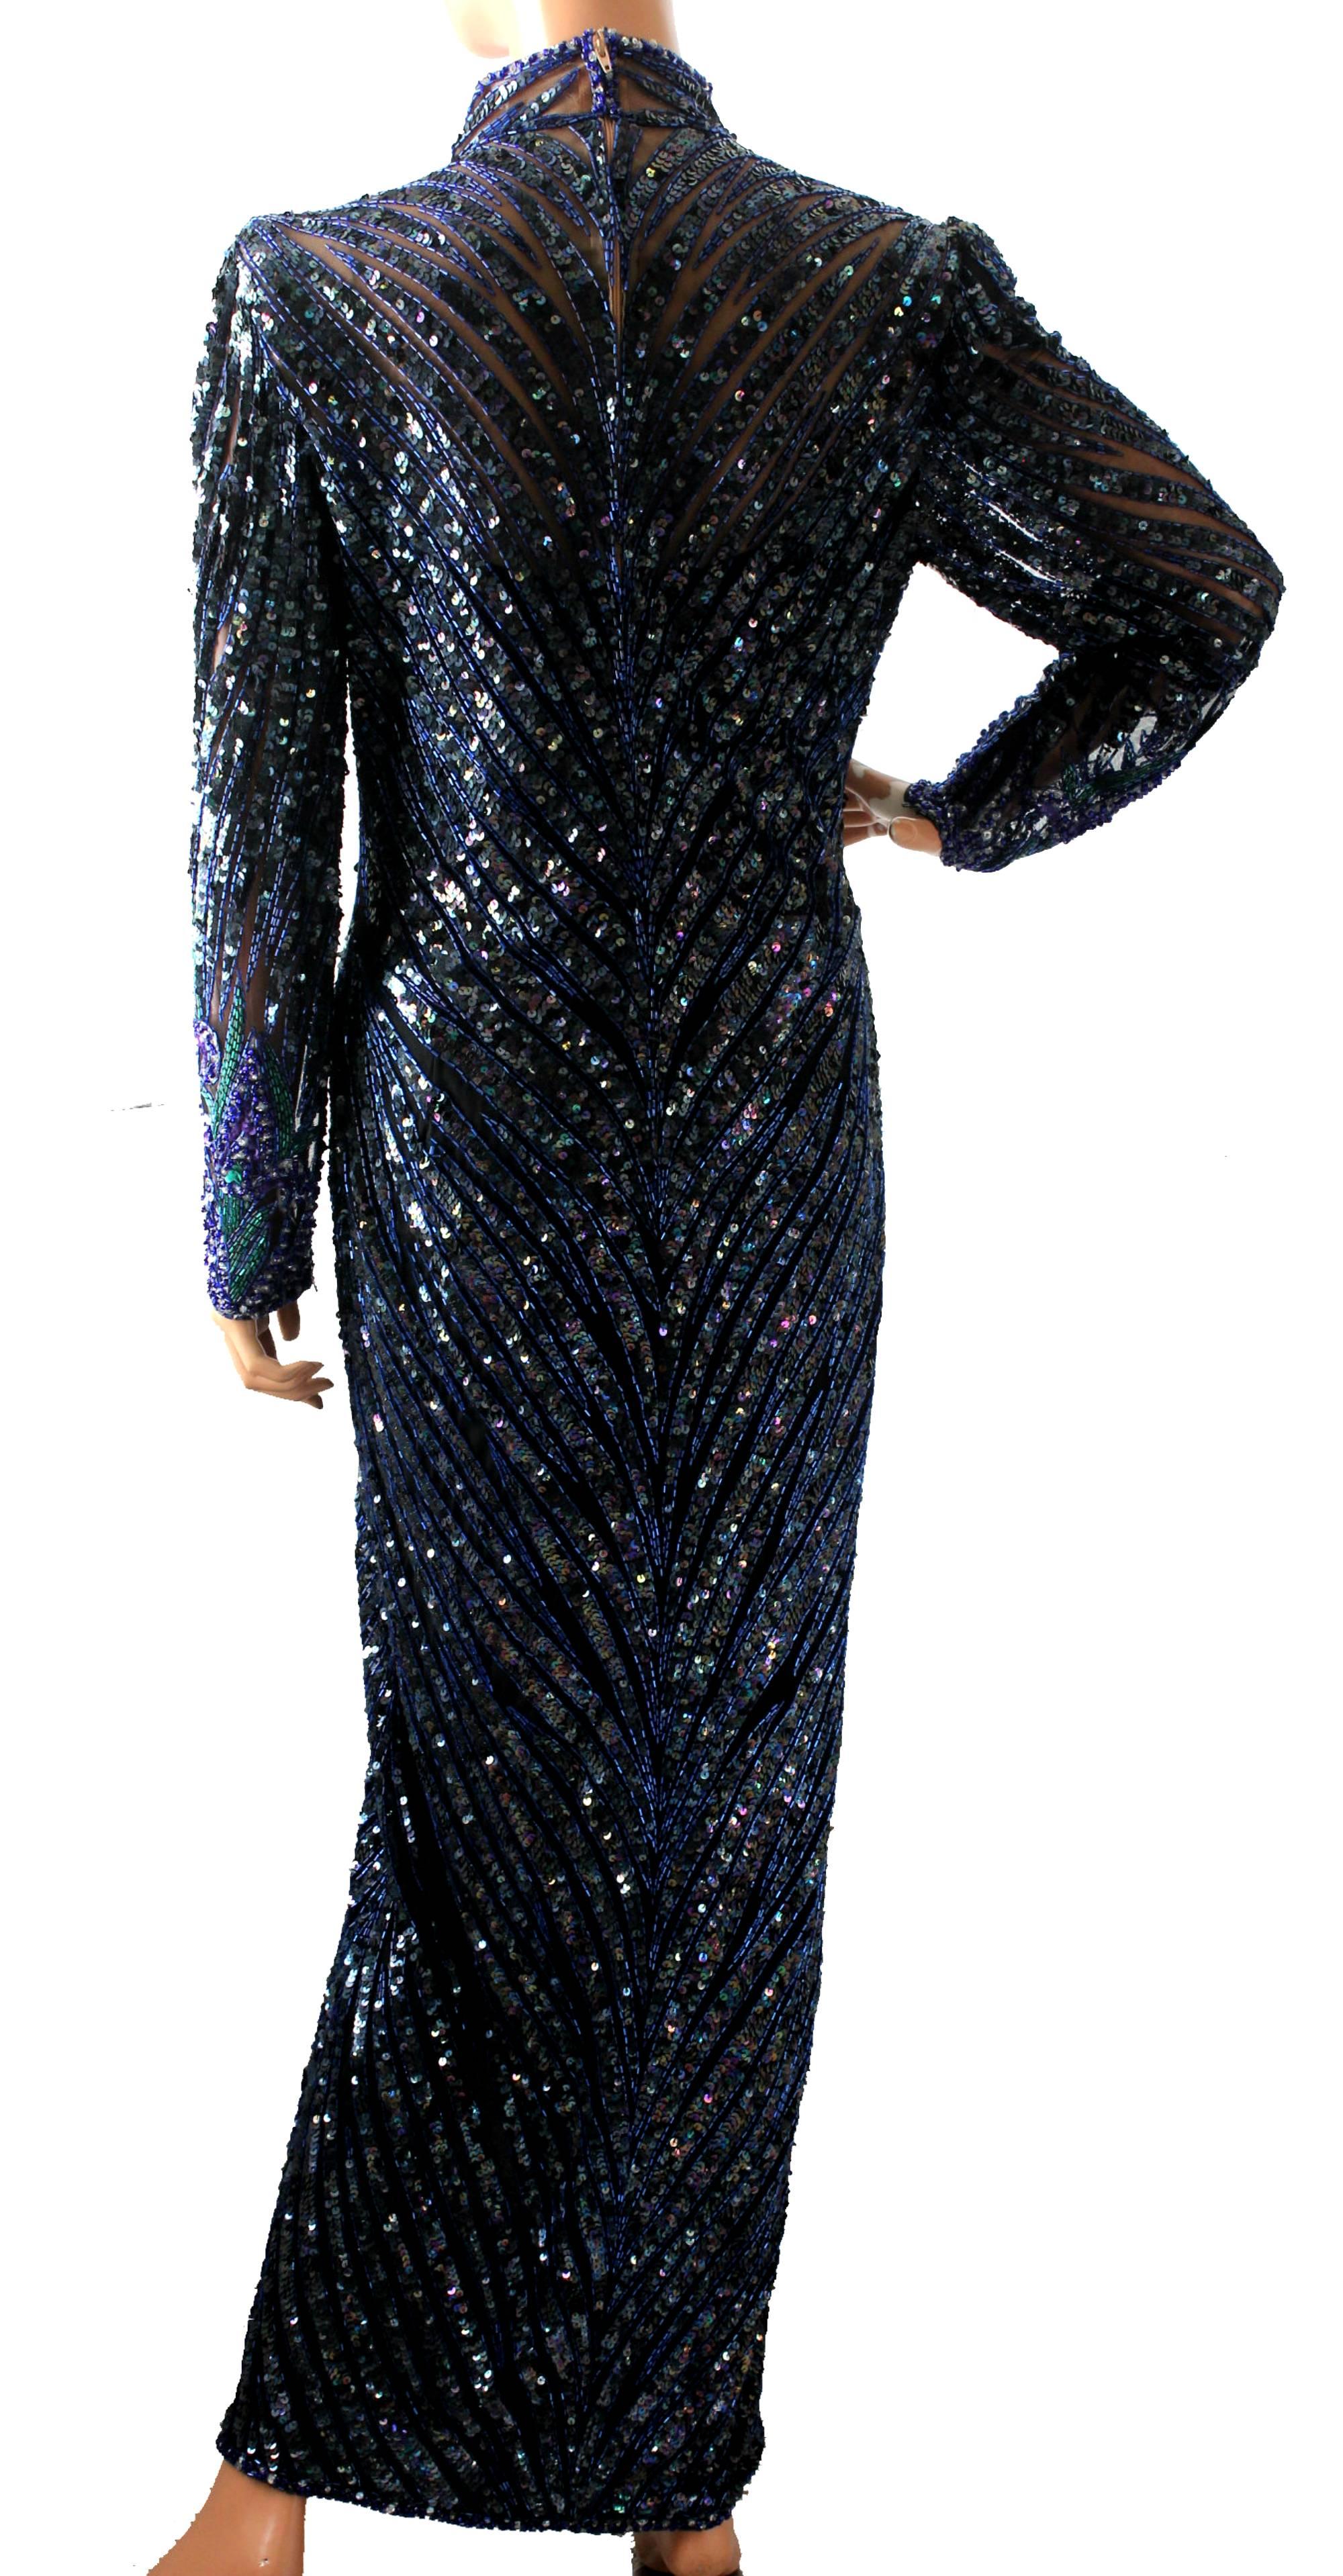 Women's Exquisite Bob Mackie Boutique Fully Beaded Evening Gown Early 80s Size 14 